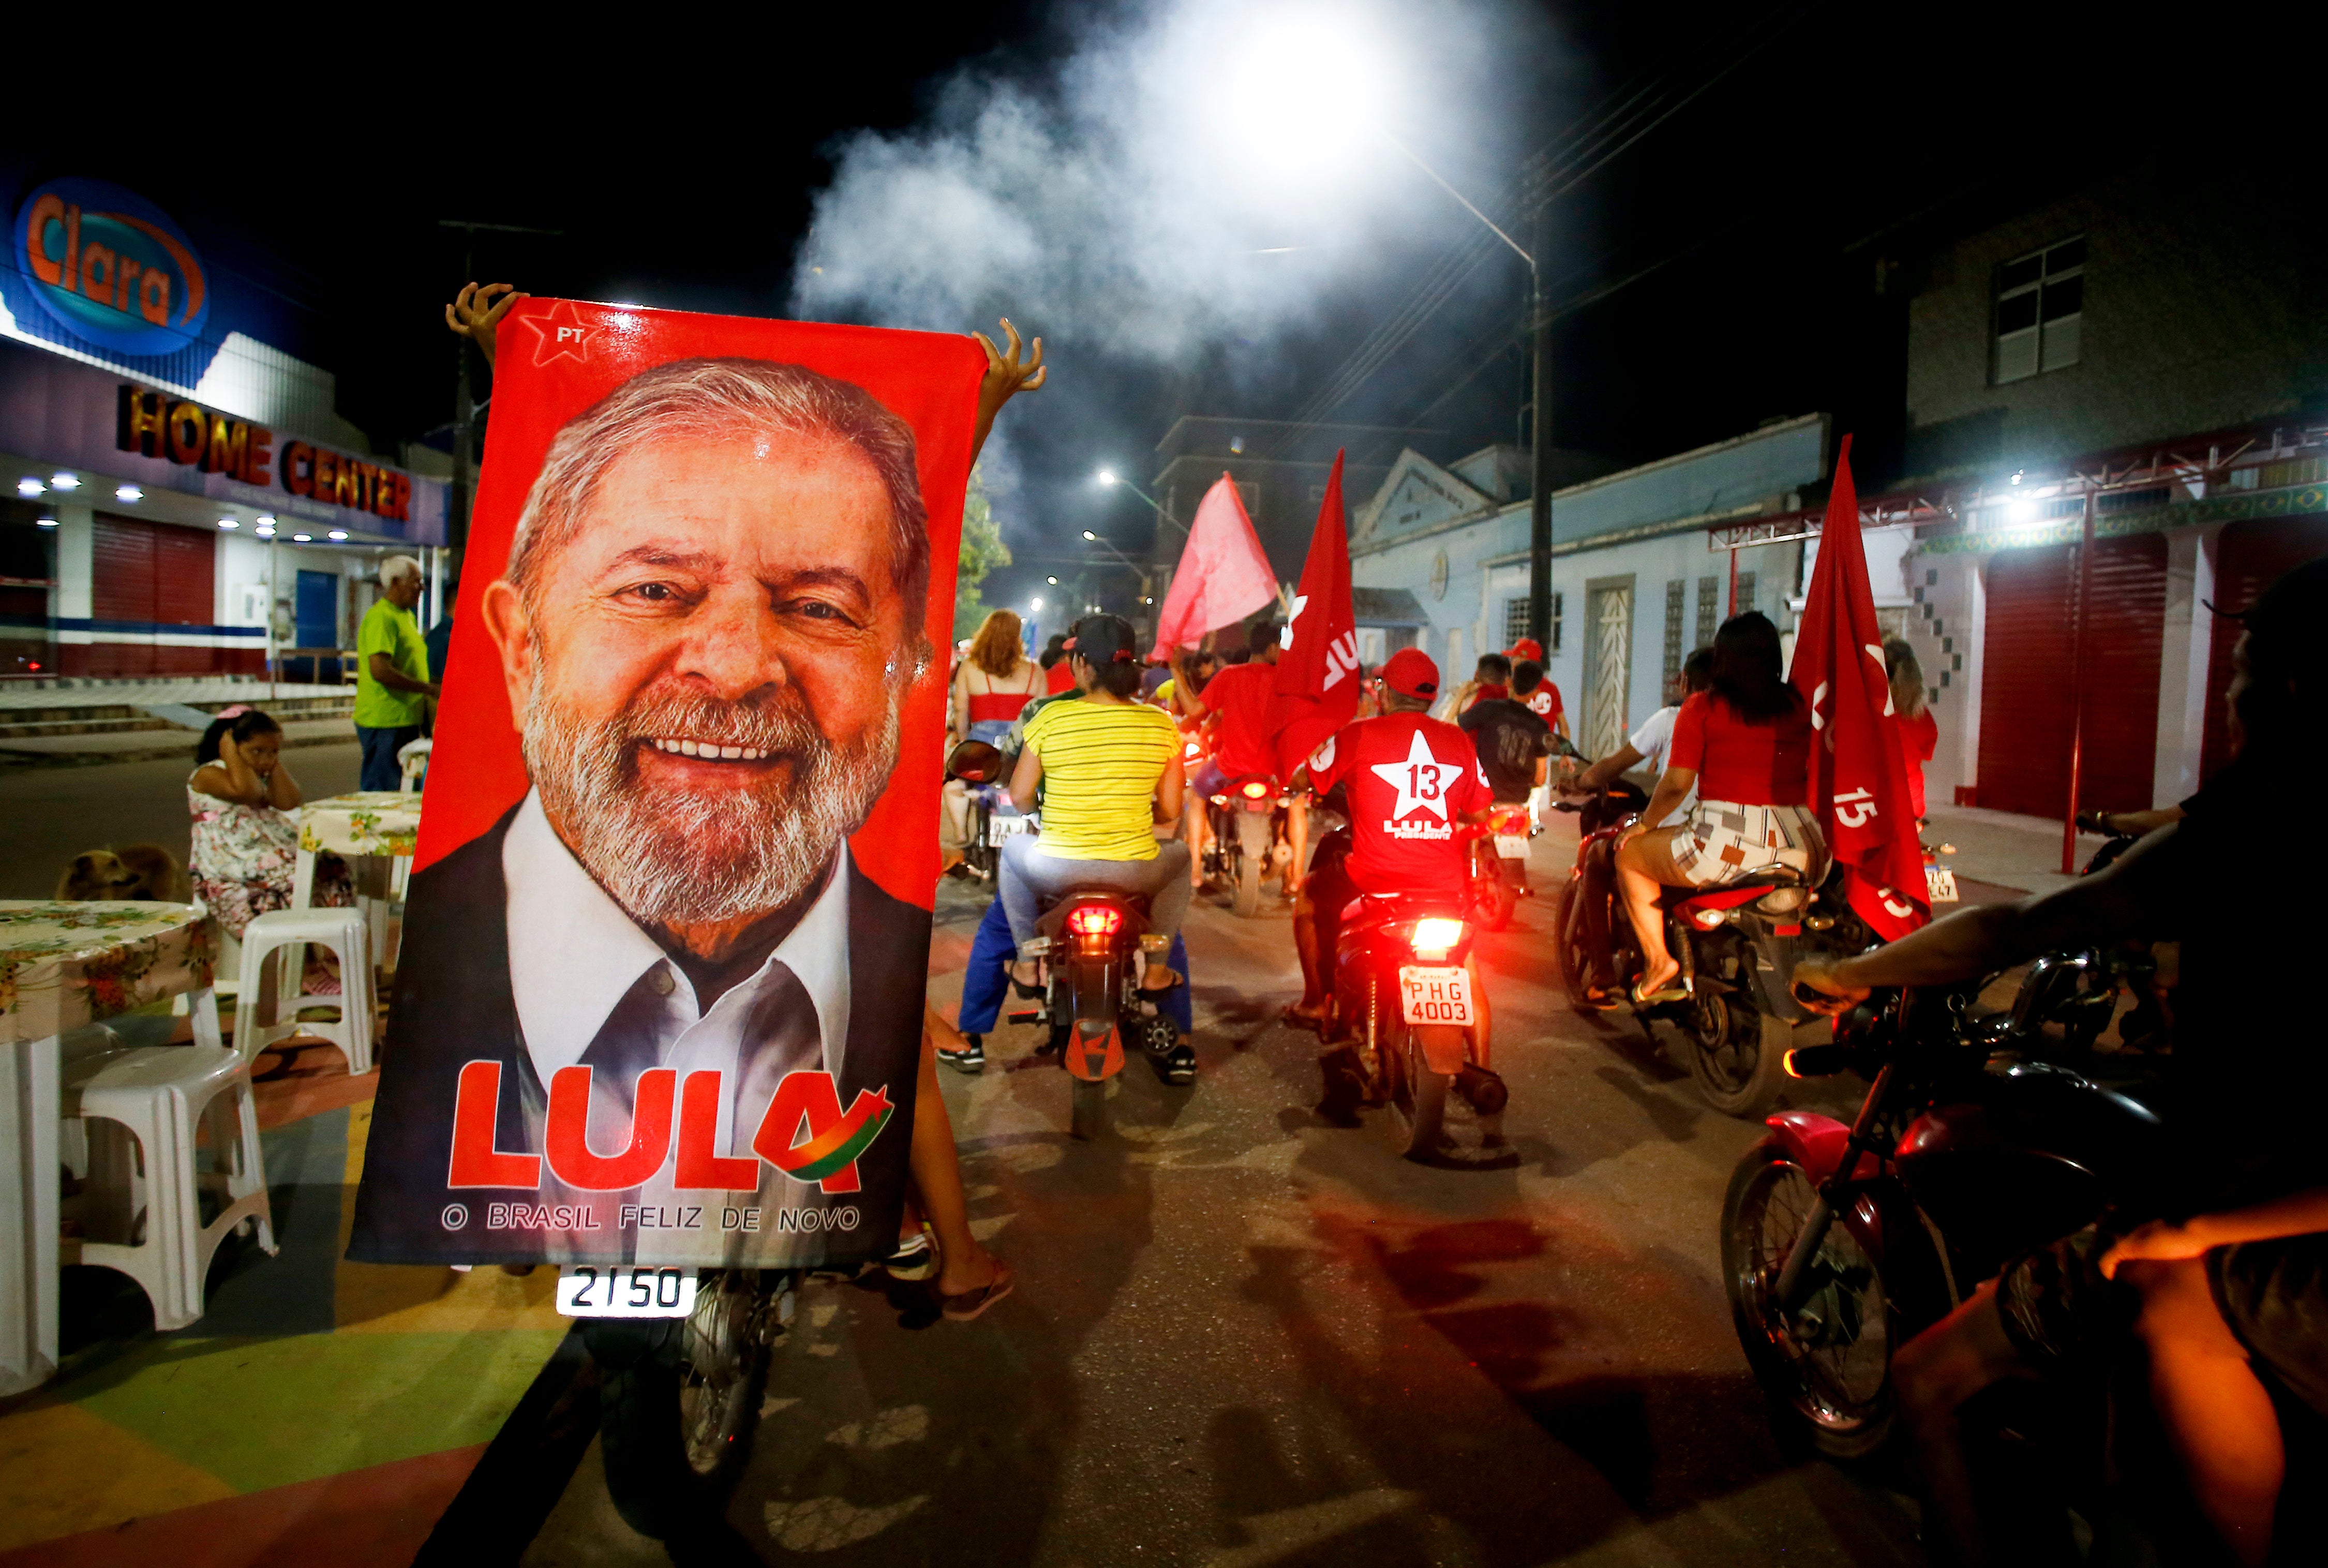 Lula supporters celebrate in the wake of Brazil’s election result